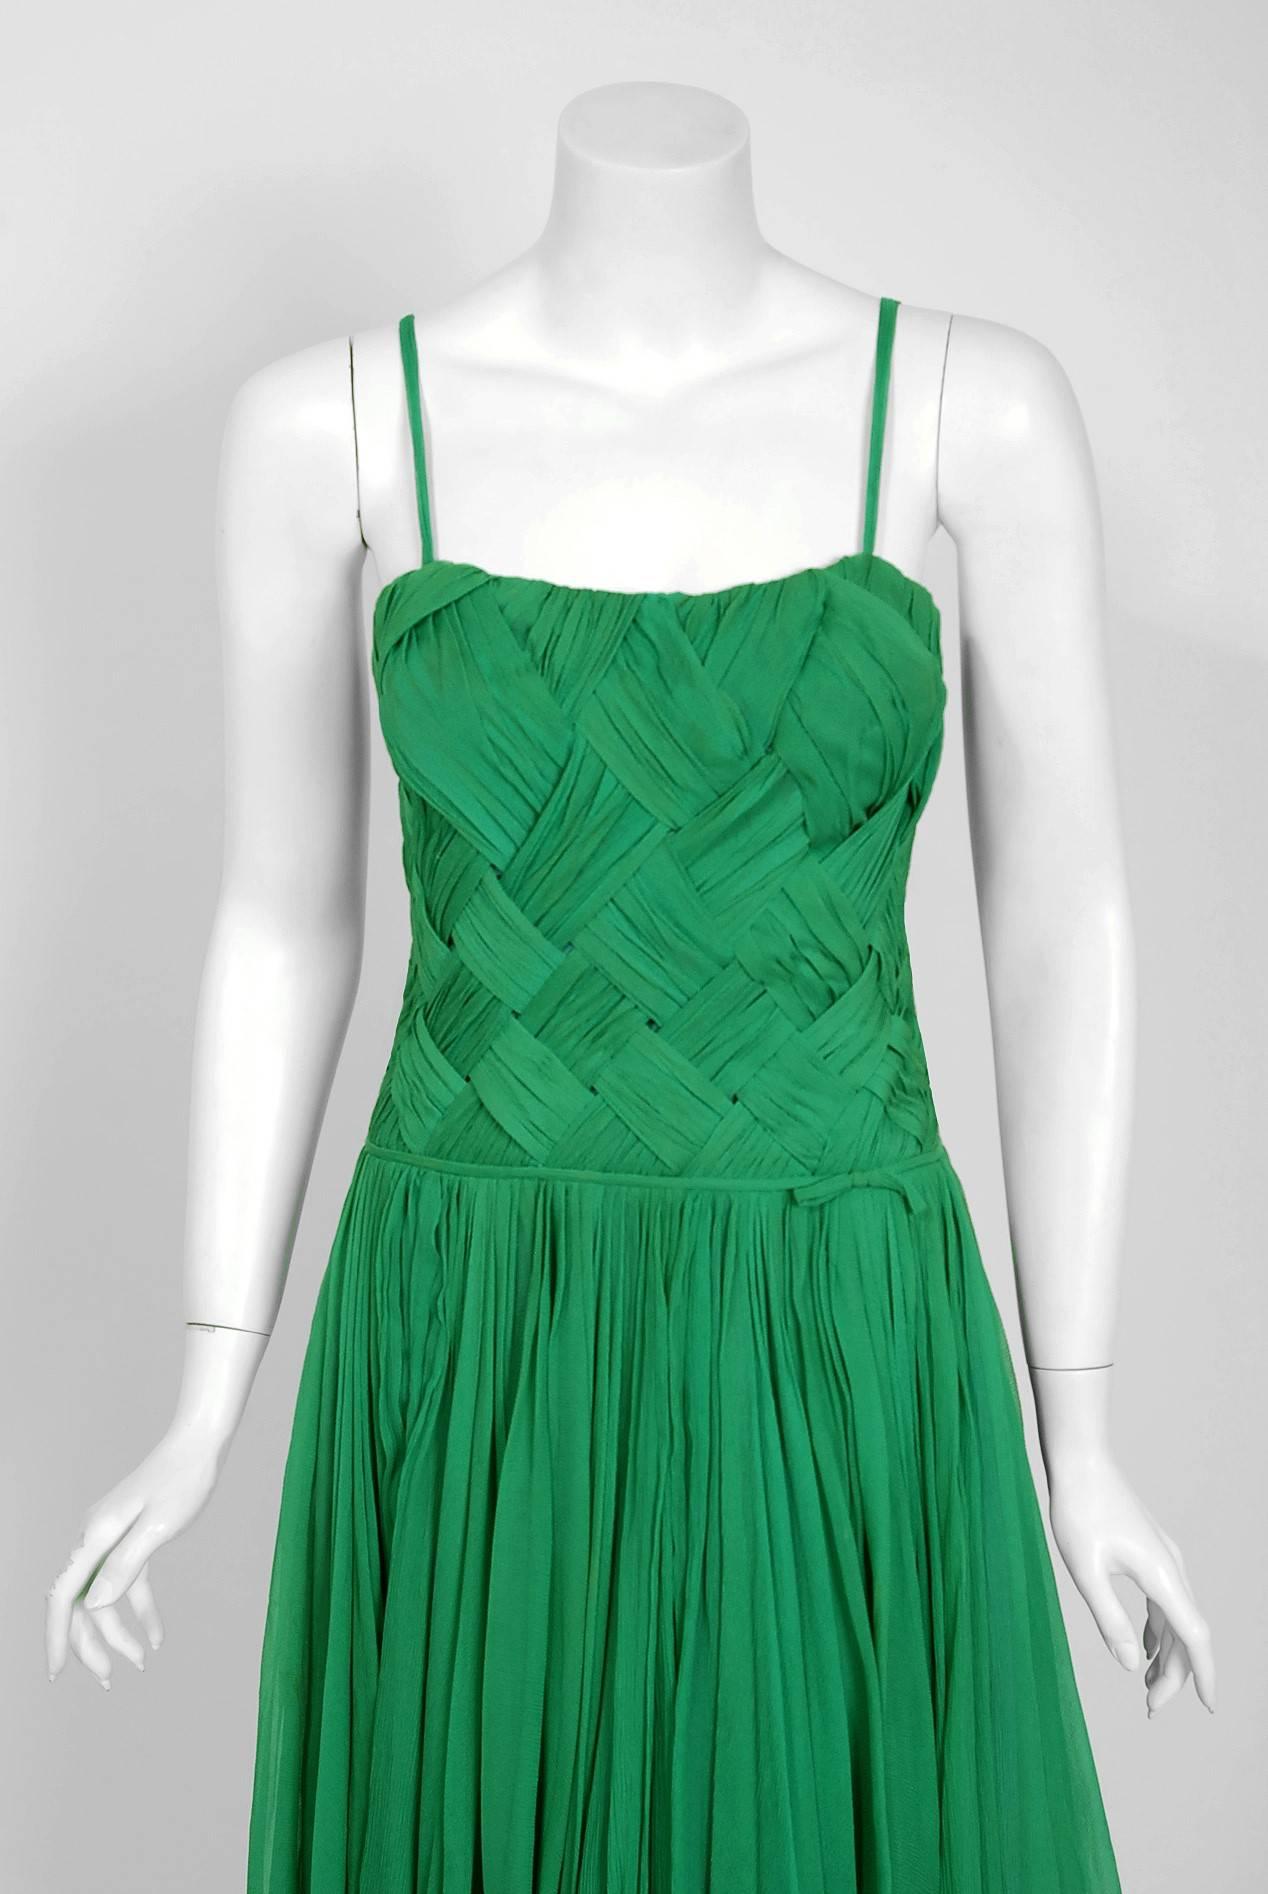 This breathtaking early 1960's Carven cocktail full-skirted cocktail dress, in the most beautiful silhouette, is pure couture perfection. Carven’s exquisite taste and enviable lifestyle became the background of her designs and a means of promotion.